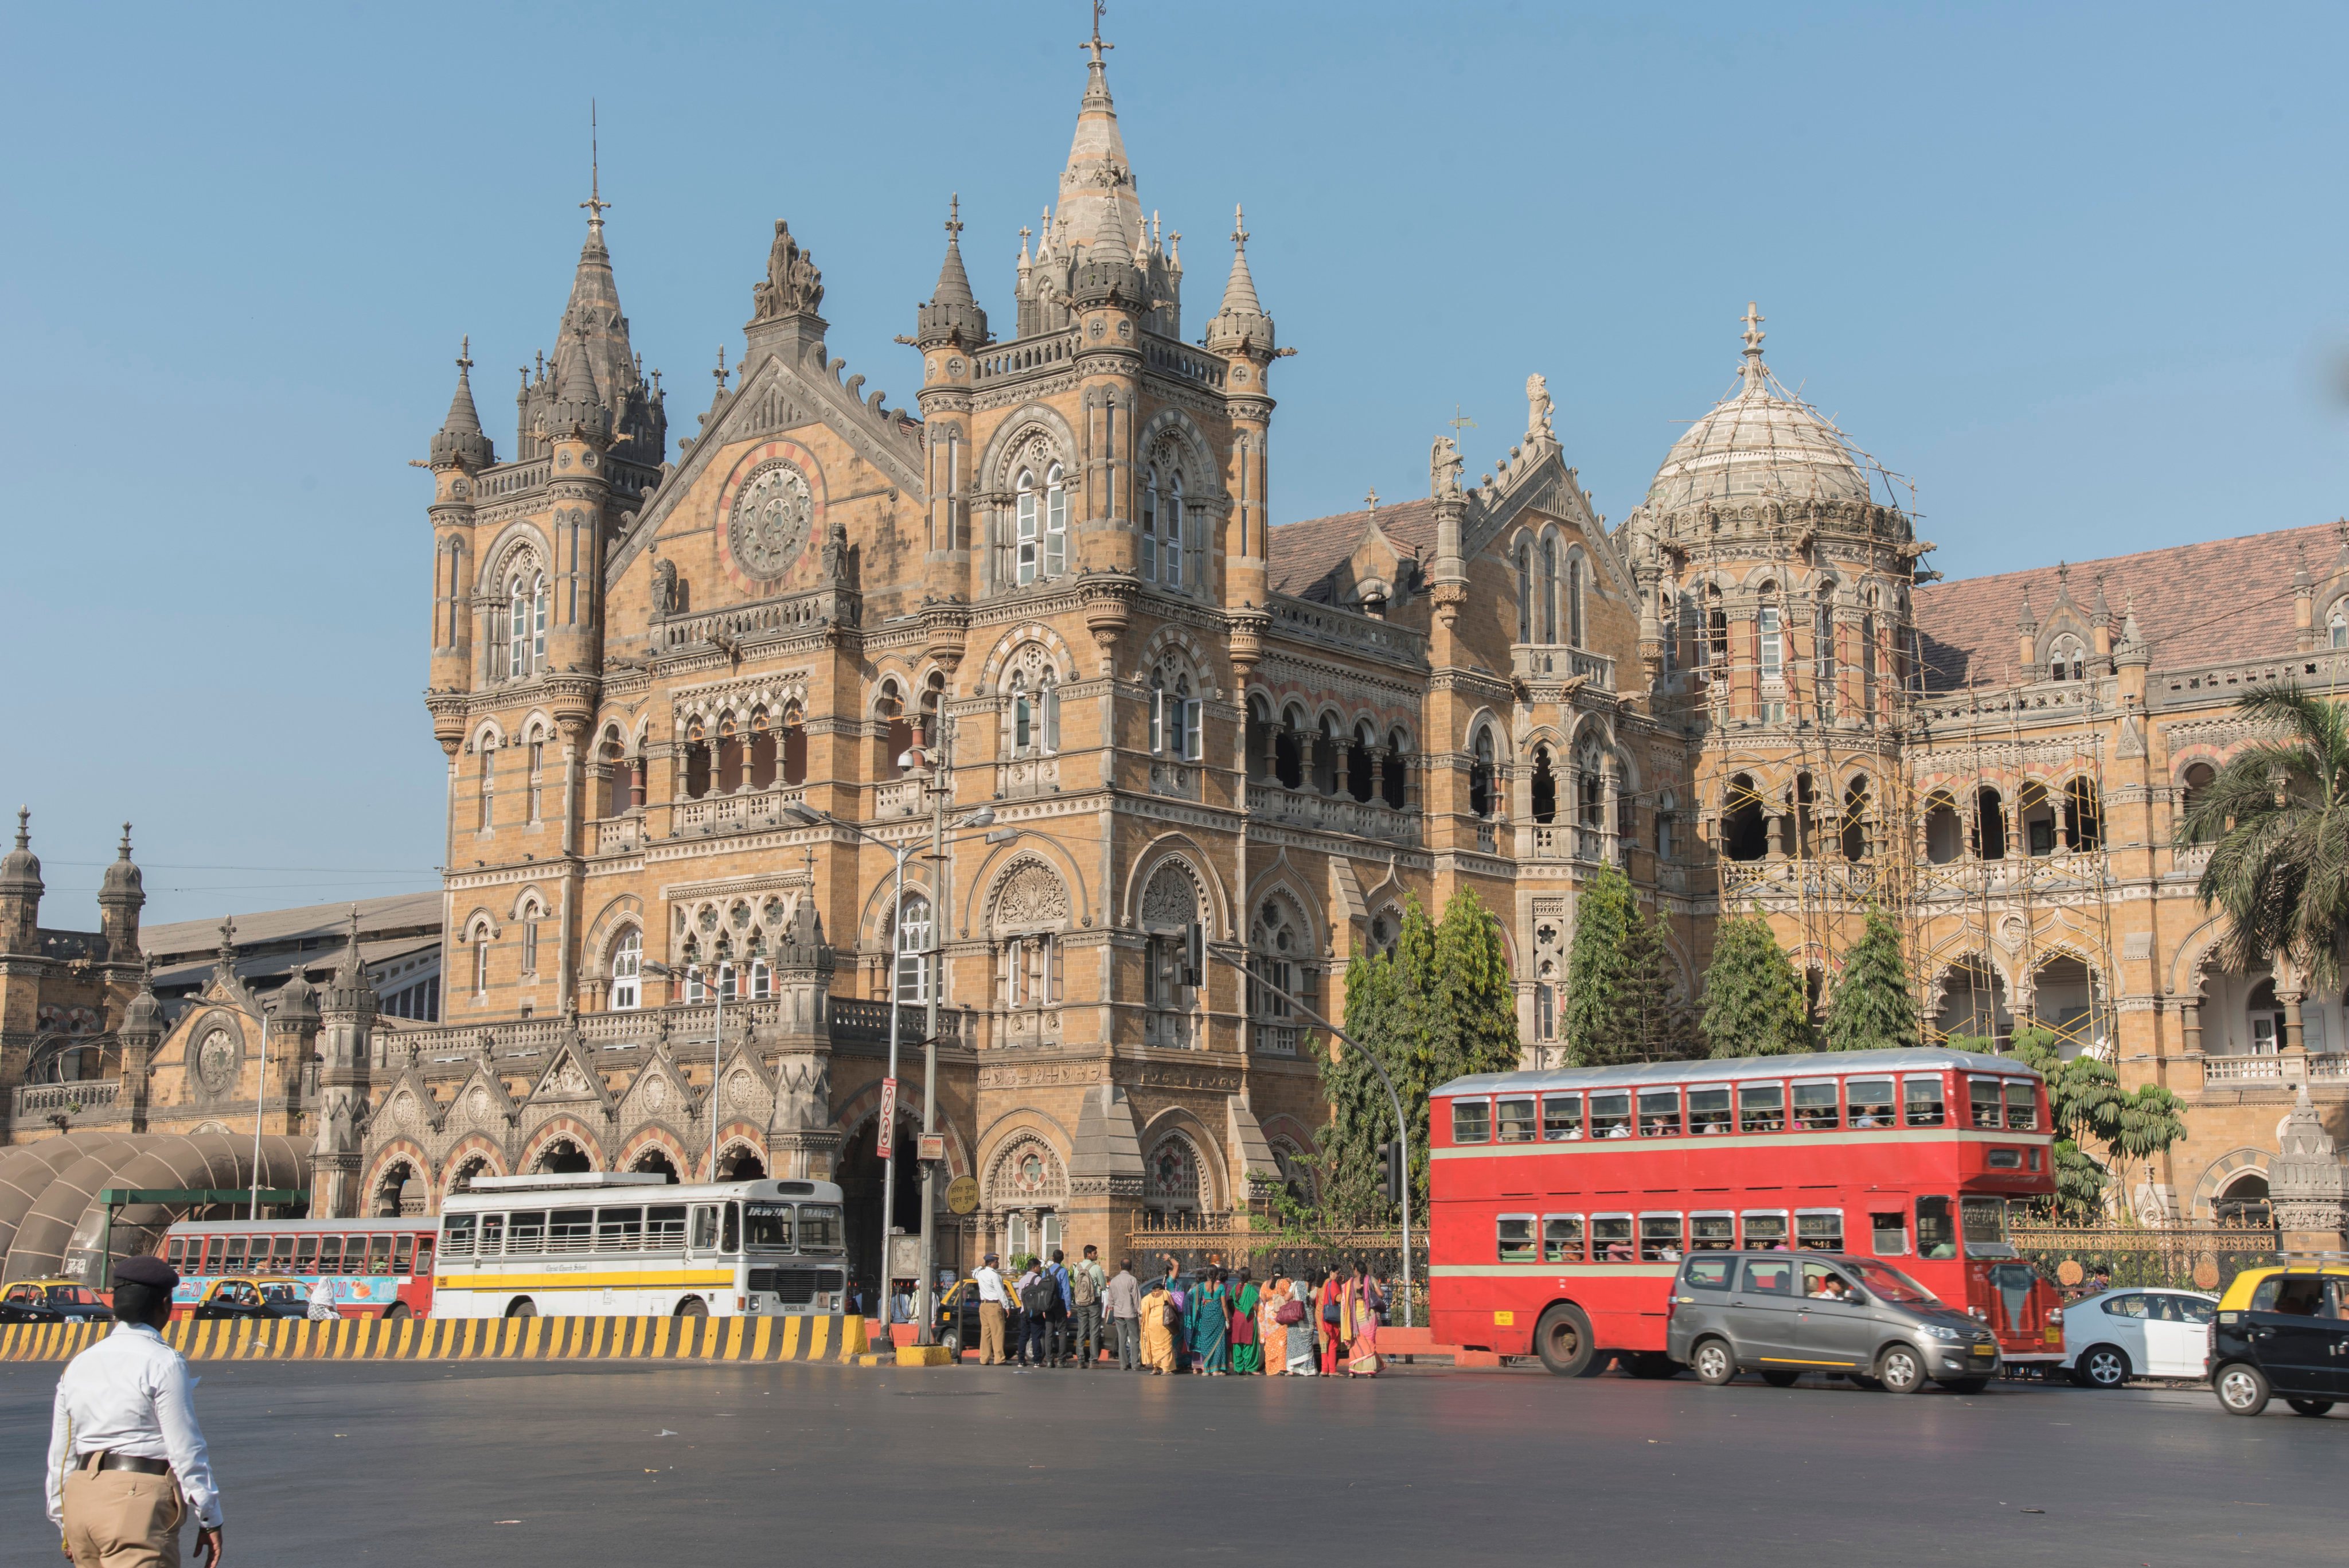 Chhatrapati Shivaji Maharaj Terminus, once Victoria Terminus, is an example of architecture from the British colonial era found in Mumbai, India’s City of Dreams. For all its plus points, it has some negatives too. Photo: Tim Pile